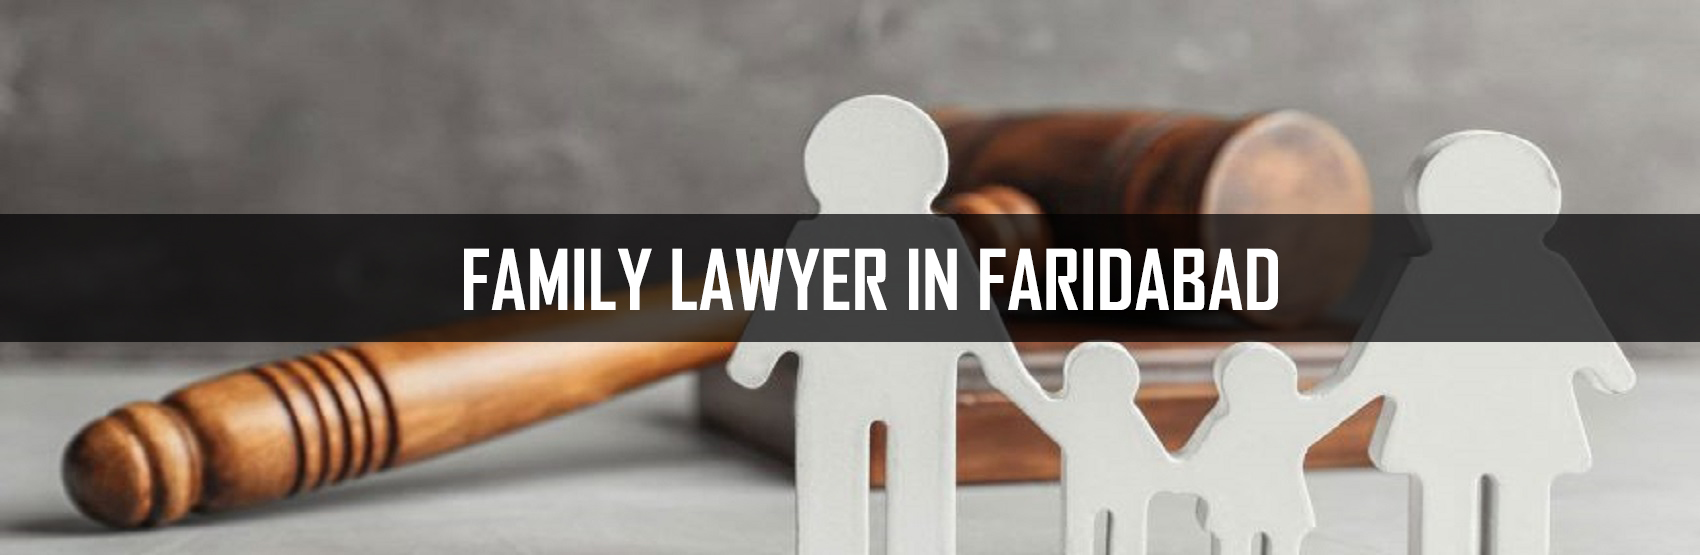 Family Lawyer in Faridabad